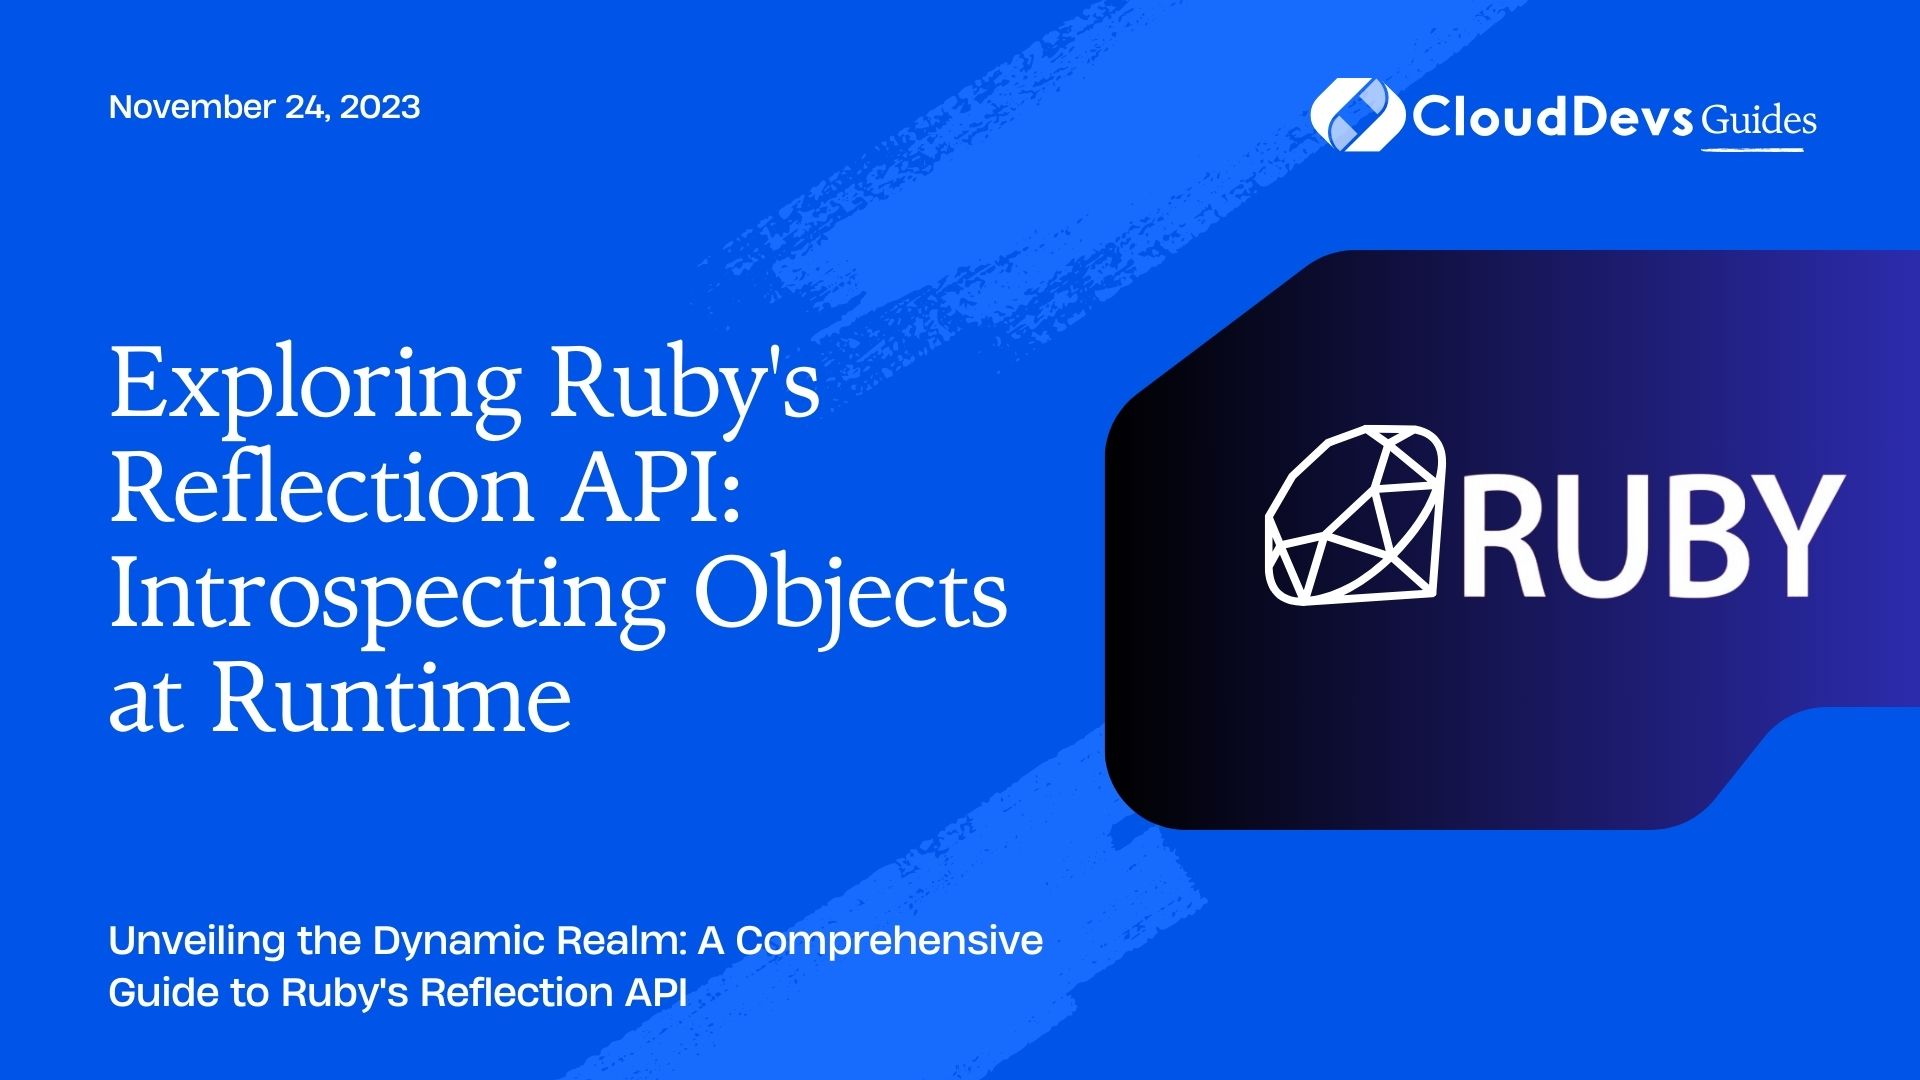 Exploring Ruby's Reflection API: Introspecting Objects at Runtime